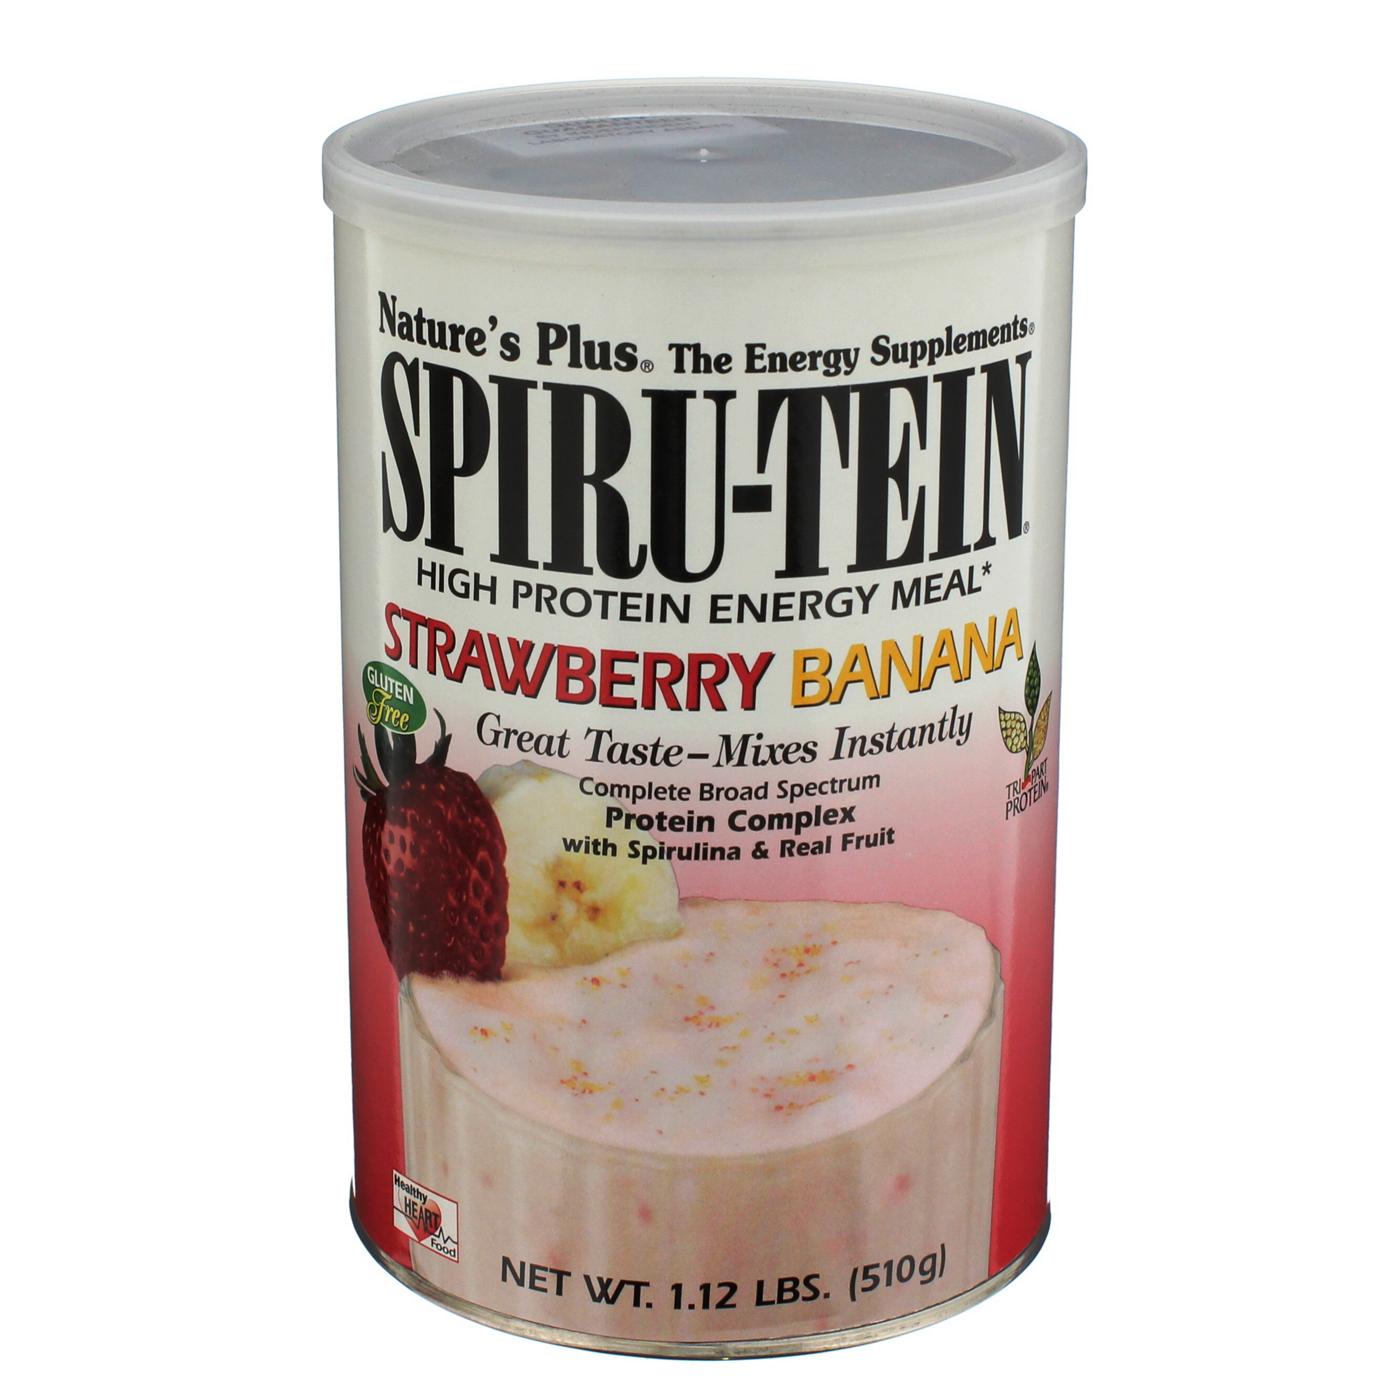 Nature's Plus Spiru-Tein Strawberry Banana High Protein Energy Meal; image 1 of 2